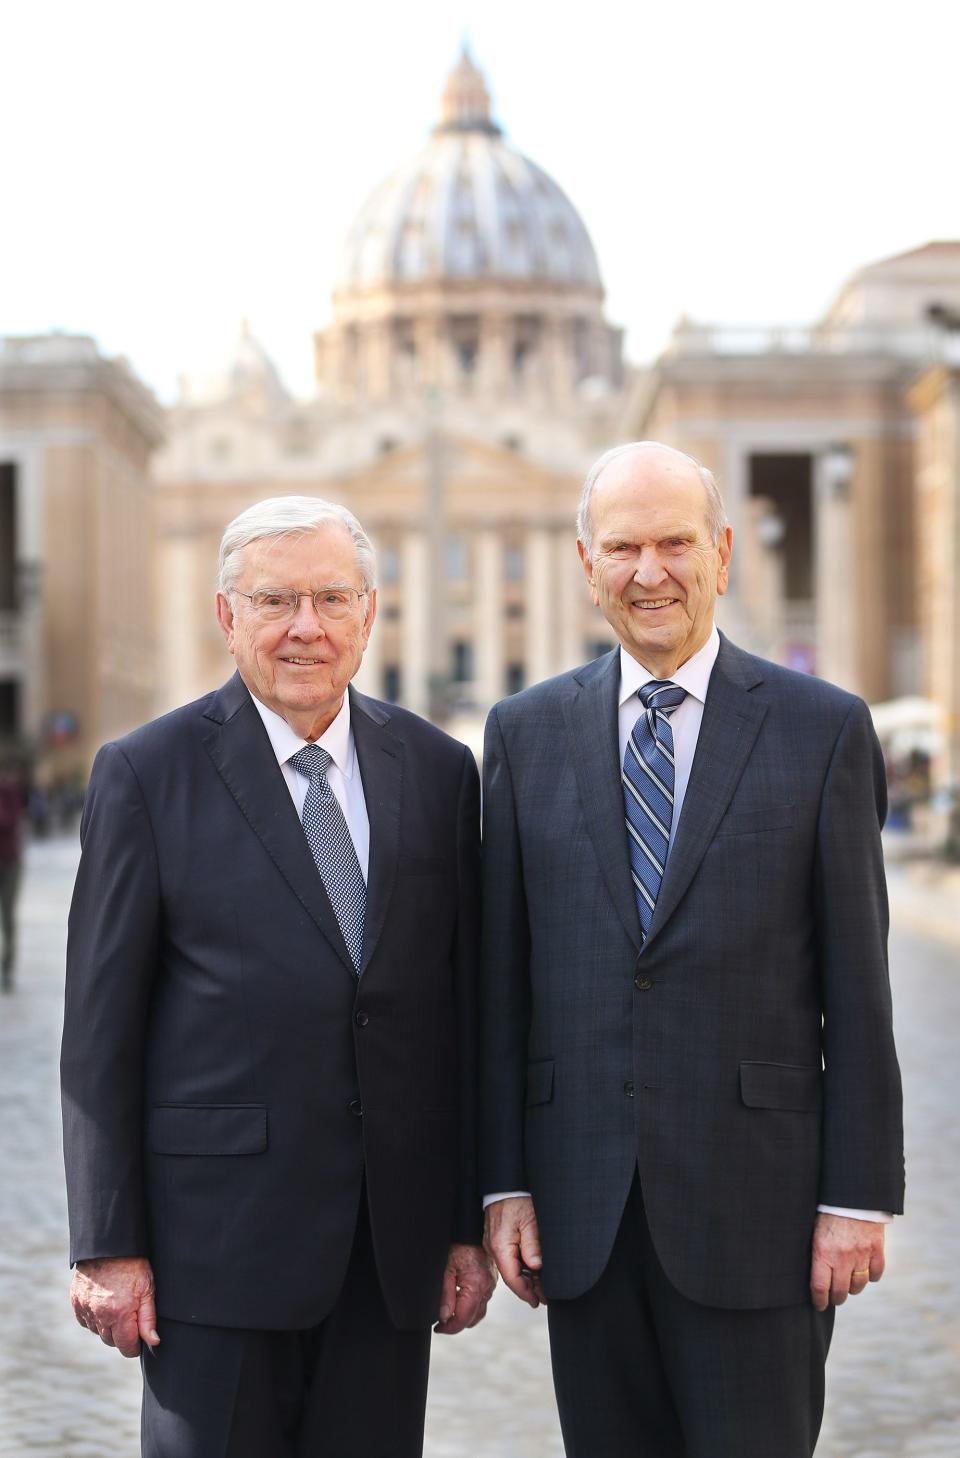 President Russell M. Nelson of The Church of Jesus Christ of Latter-day Saints and President M. Russell Ballard, acting president of the Quorum of the Twelve Apostles, pose near the Vatican in Rome, Italy, on Saturday, March 9, 2019, after meeting with Pope Francis. | Jeffrey D. Allred, Deseret News